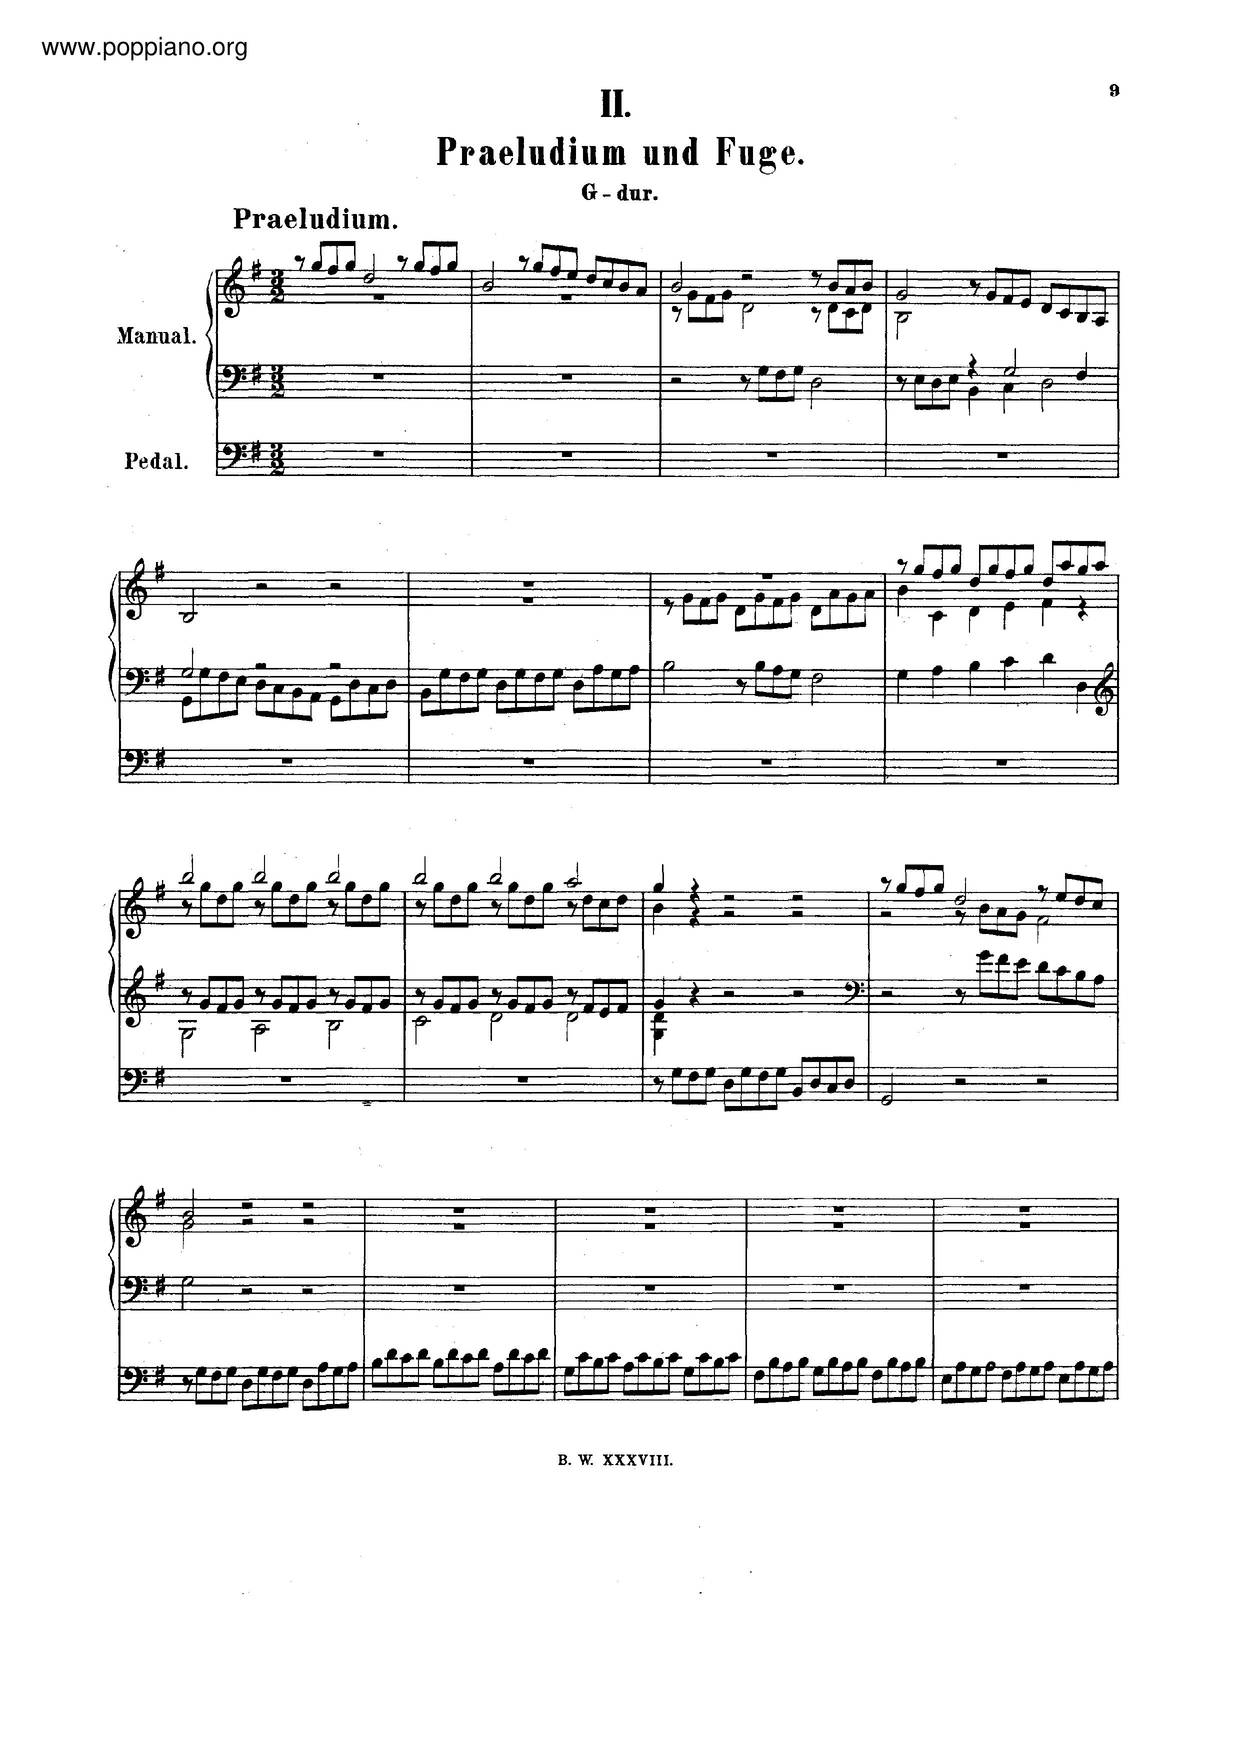 Prelude And Fugue In G Major, BWV 550琴谱